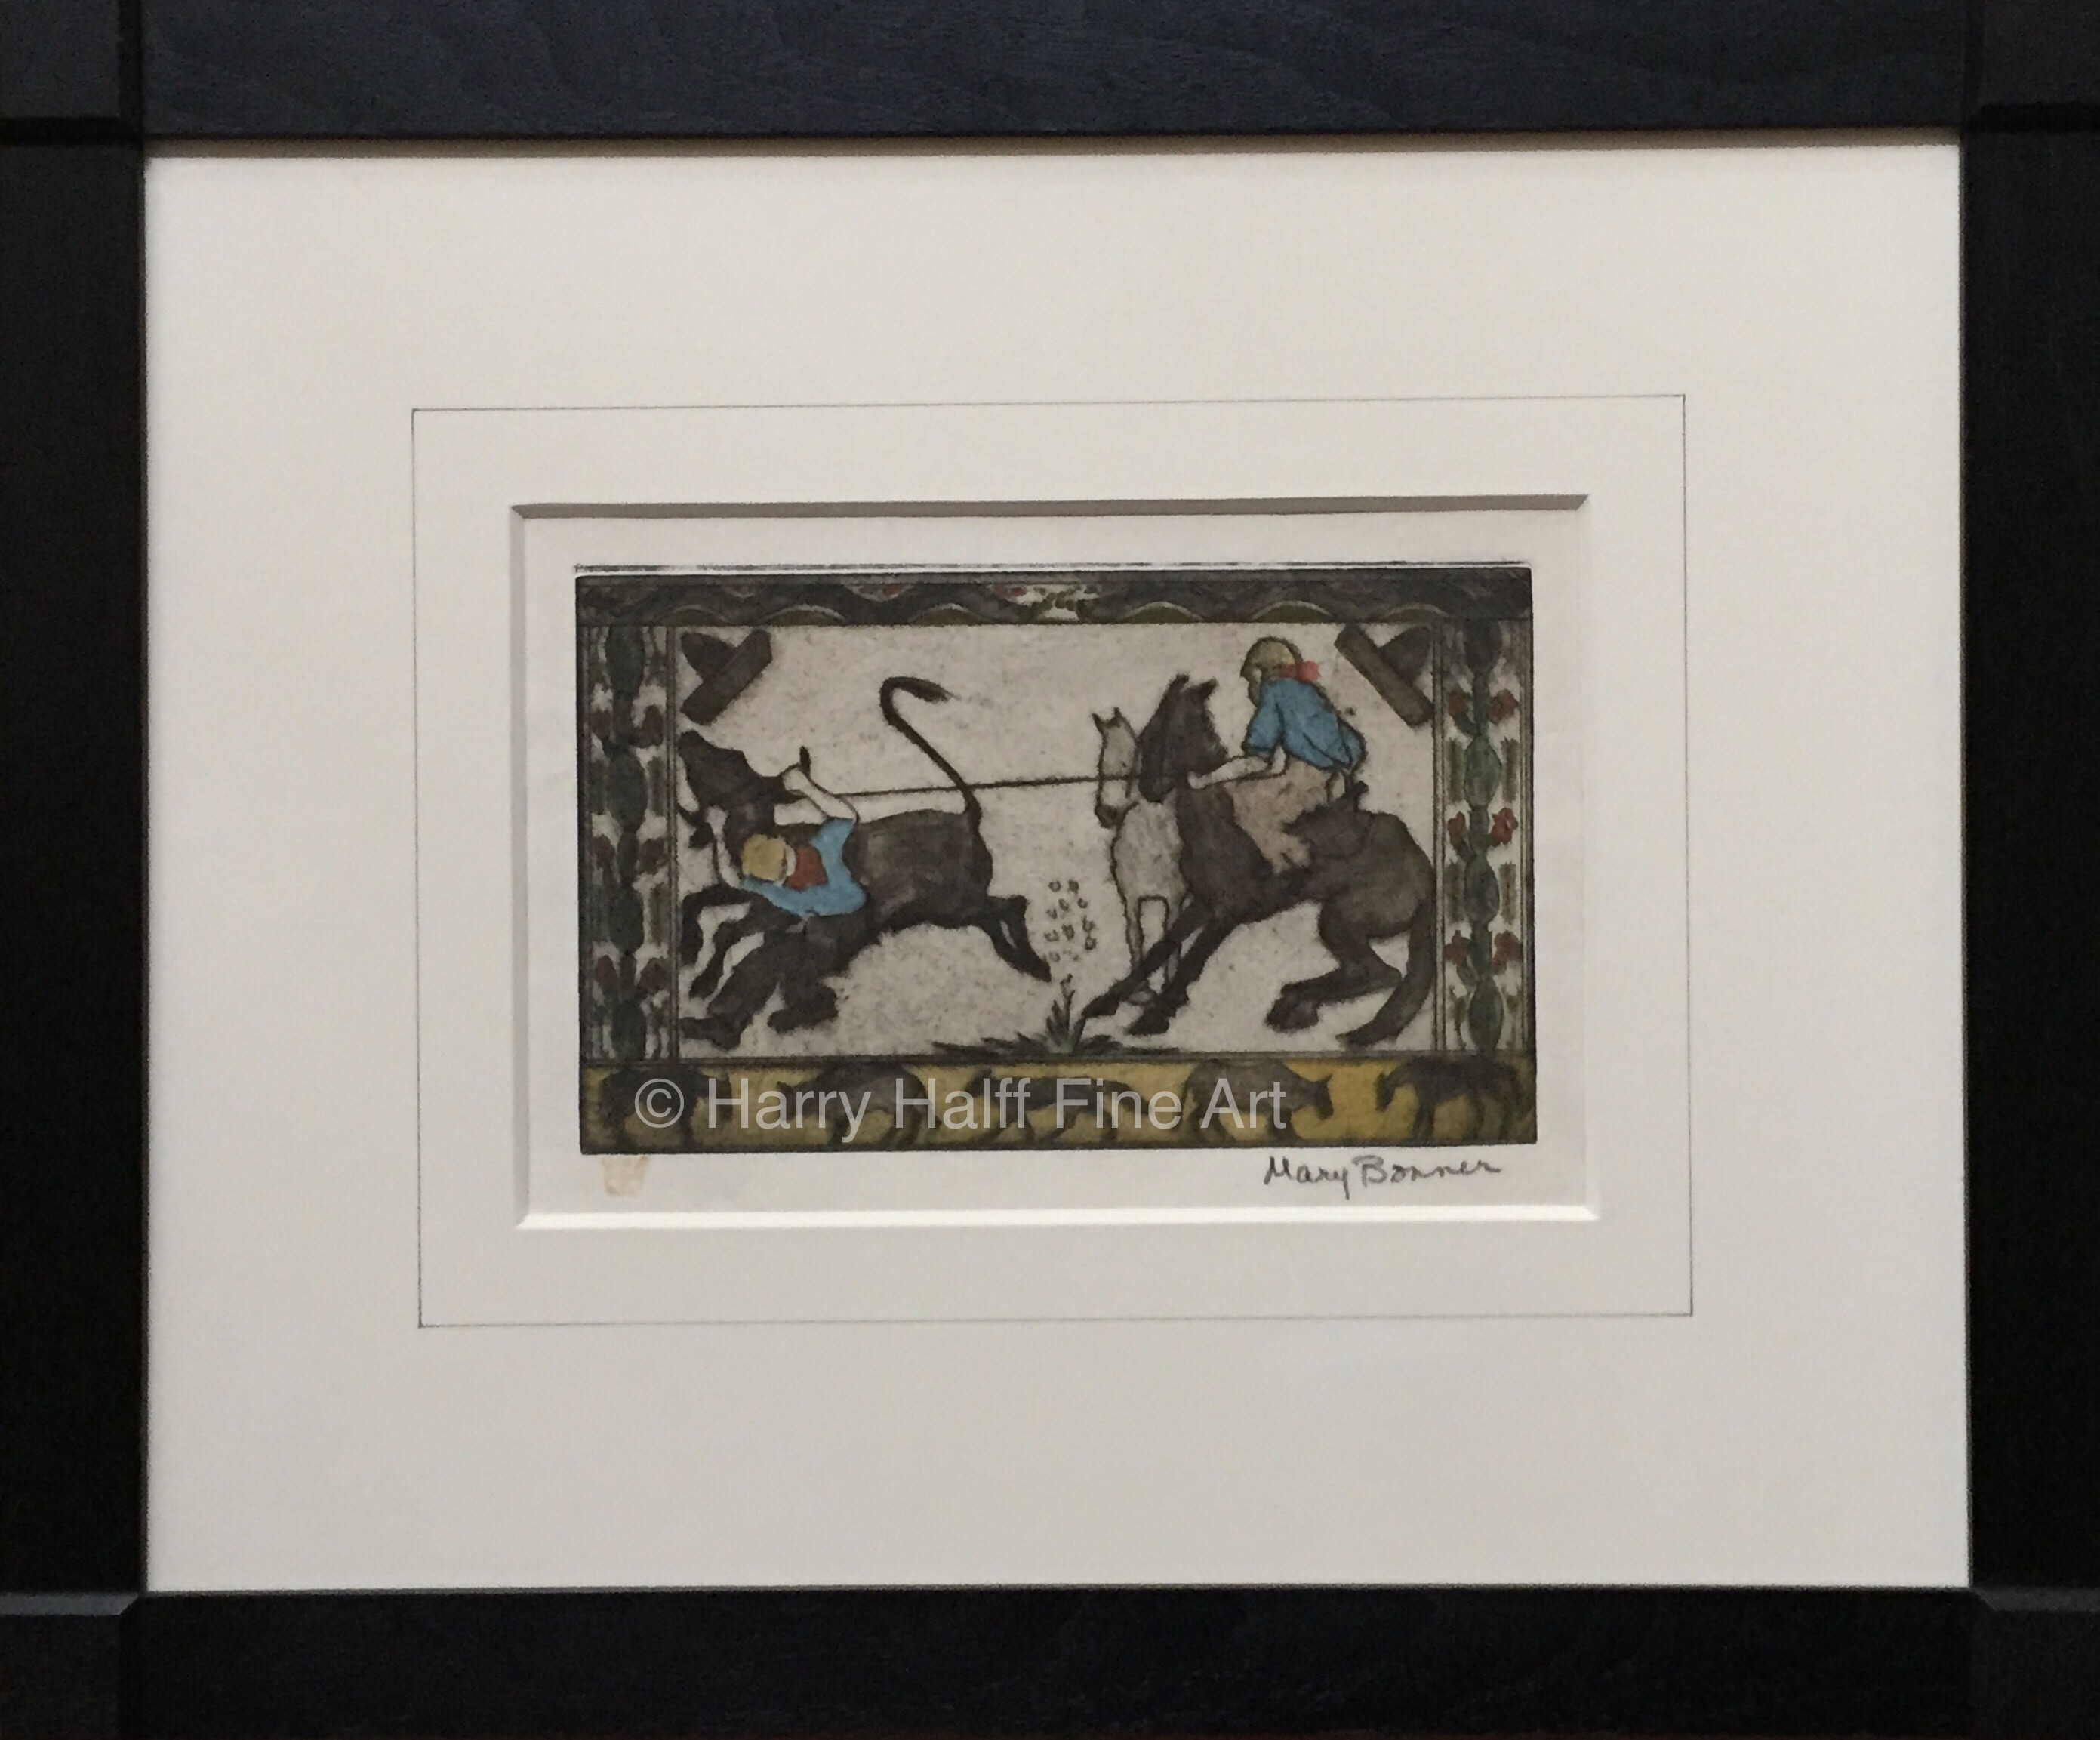 Buy Mary Bonner's etched and hand-colored piece titled "Calf Roping" that is signed in the lower right hand corner.